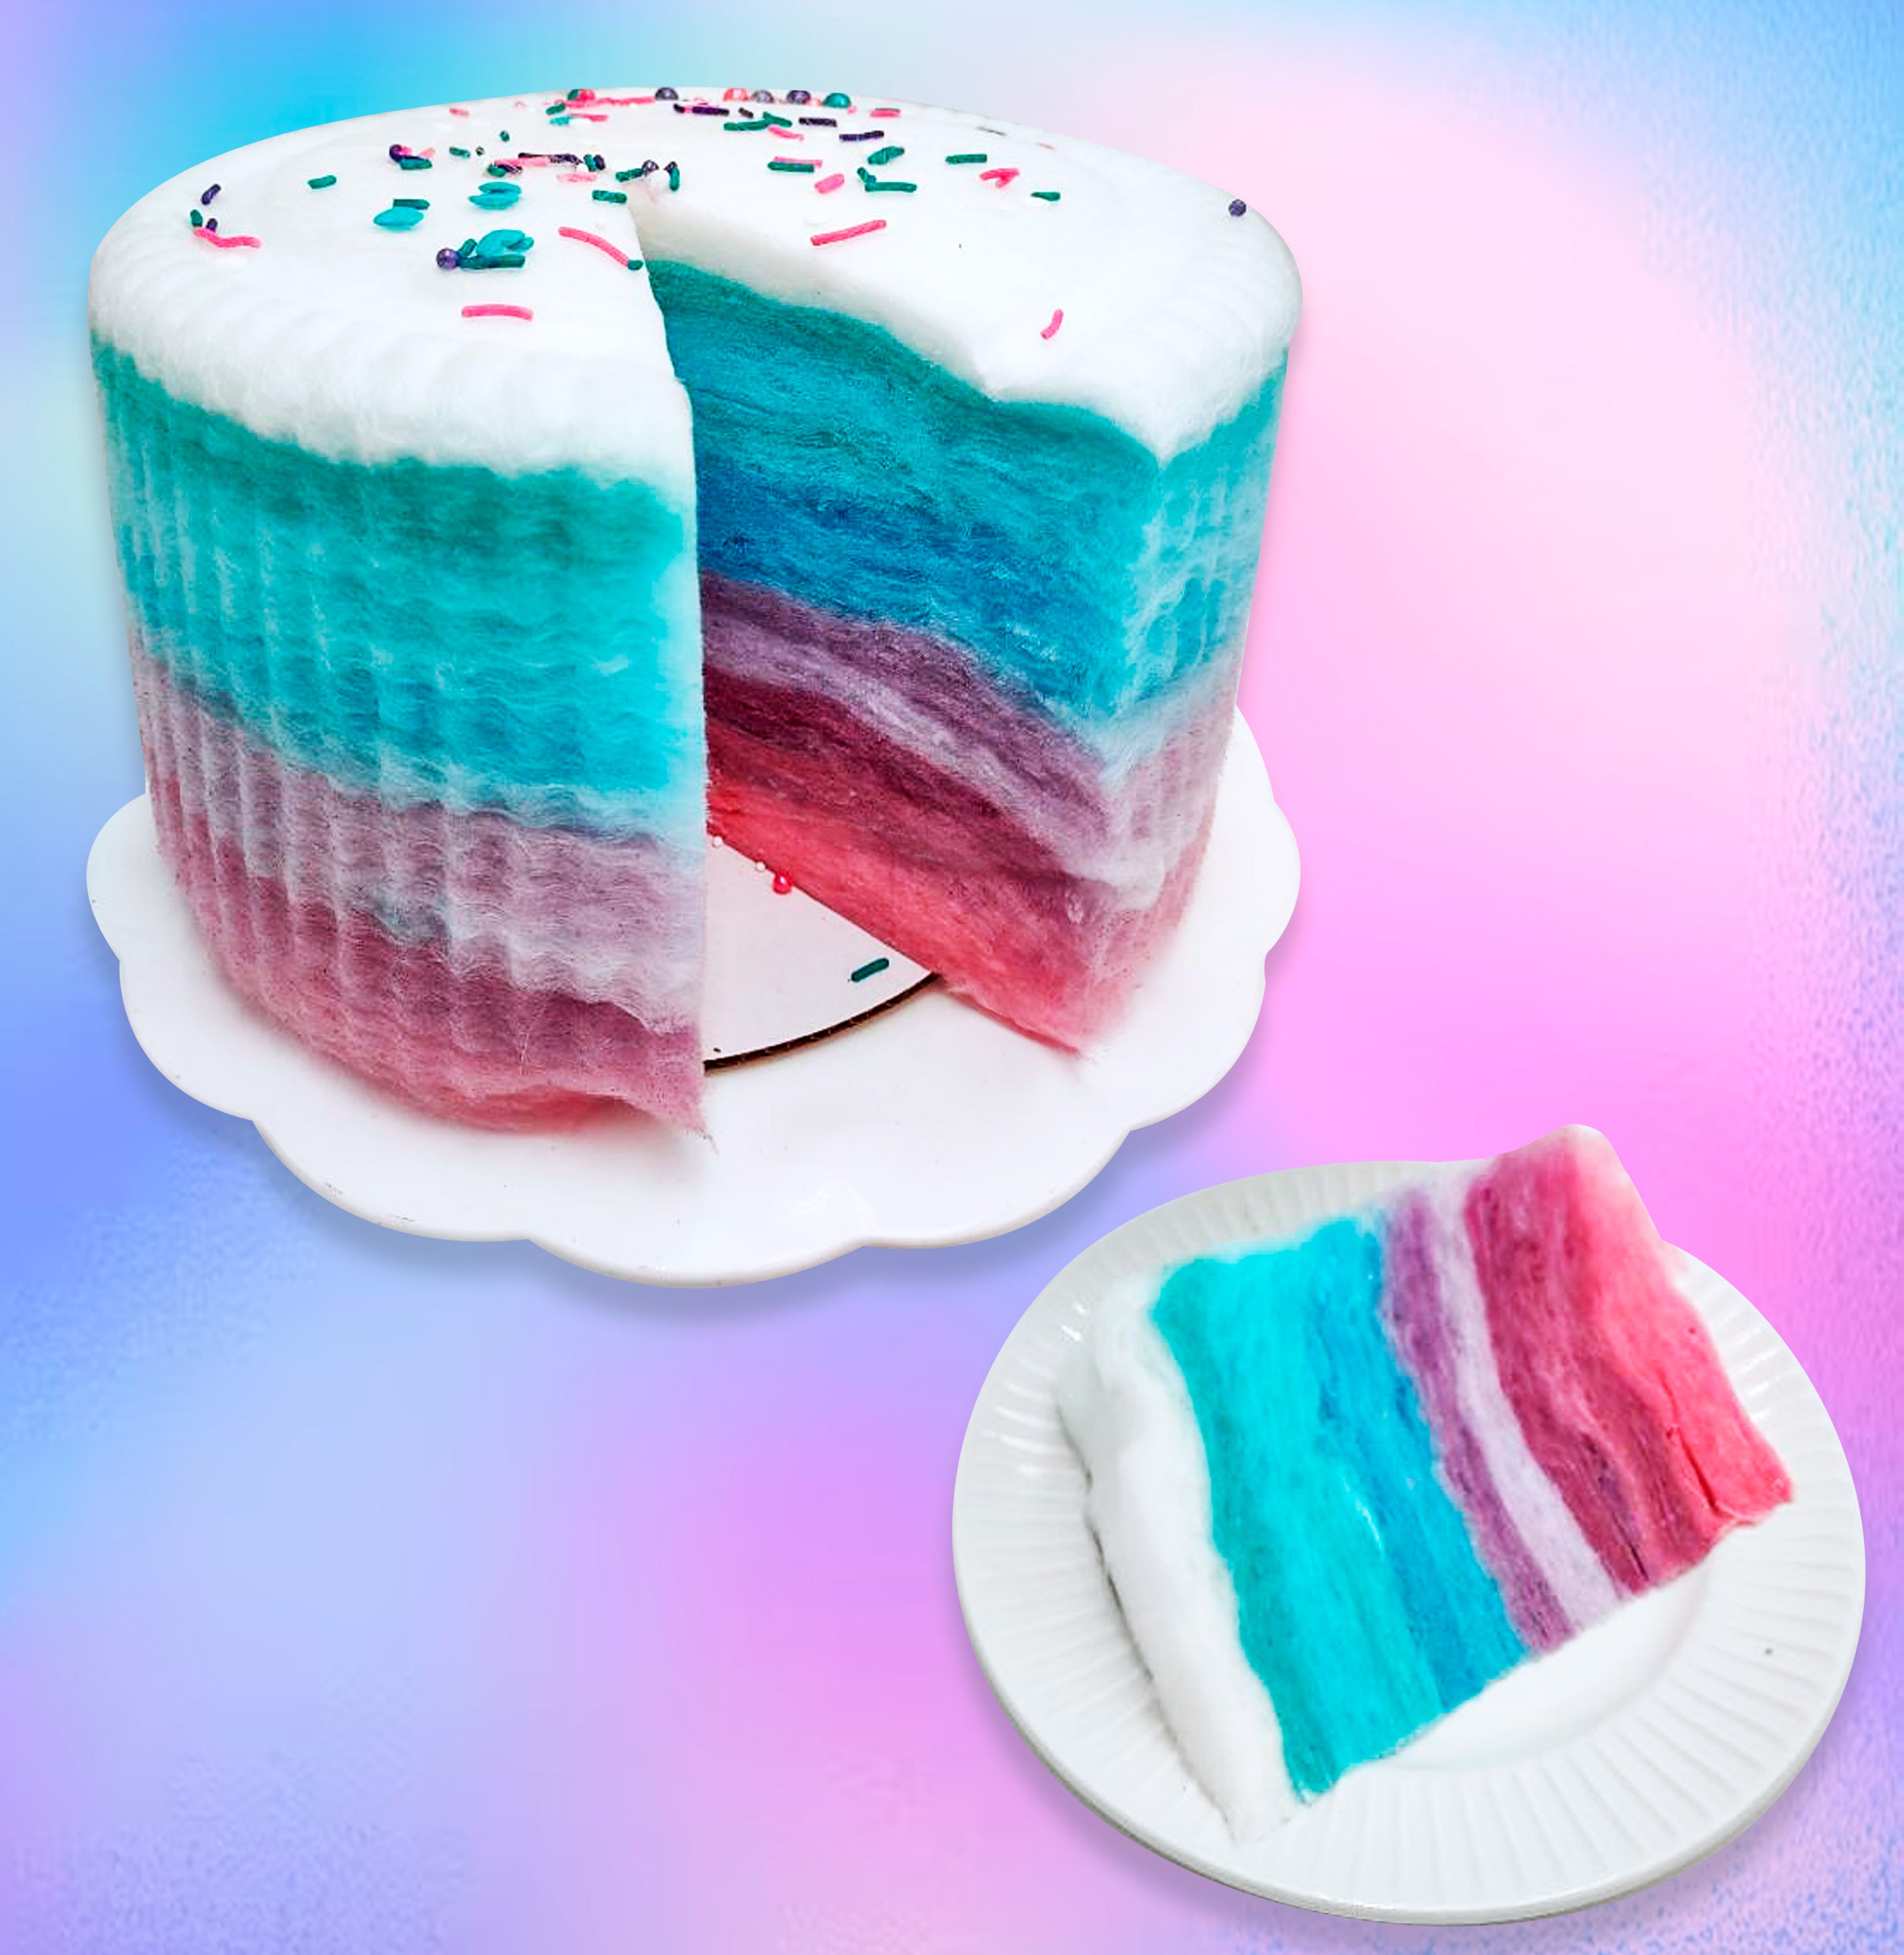 Buy Cottoncandy Cake Online in India - Etsy